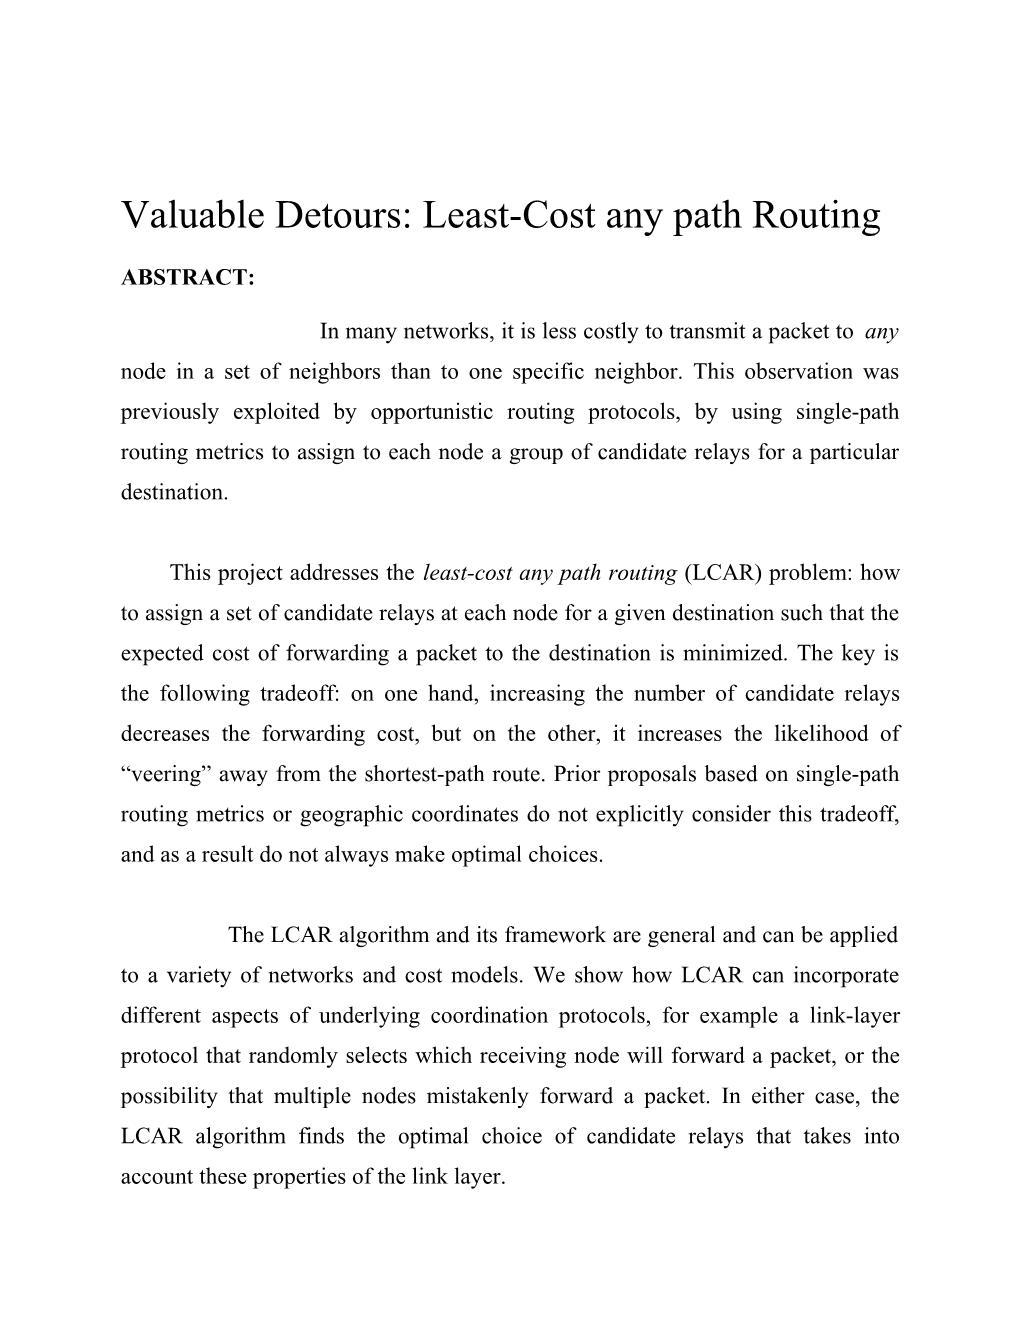 Valuable Detours: Least-Cost Any Path Routing